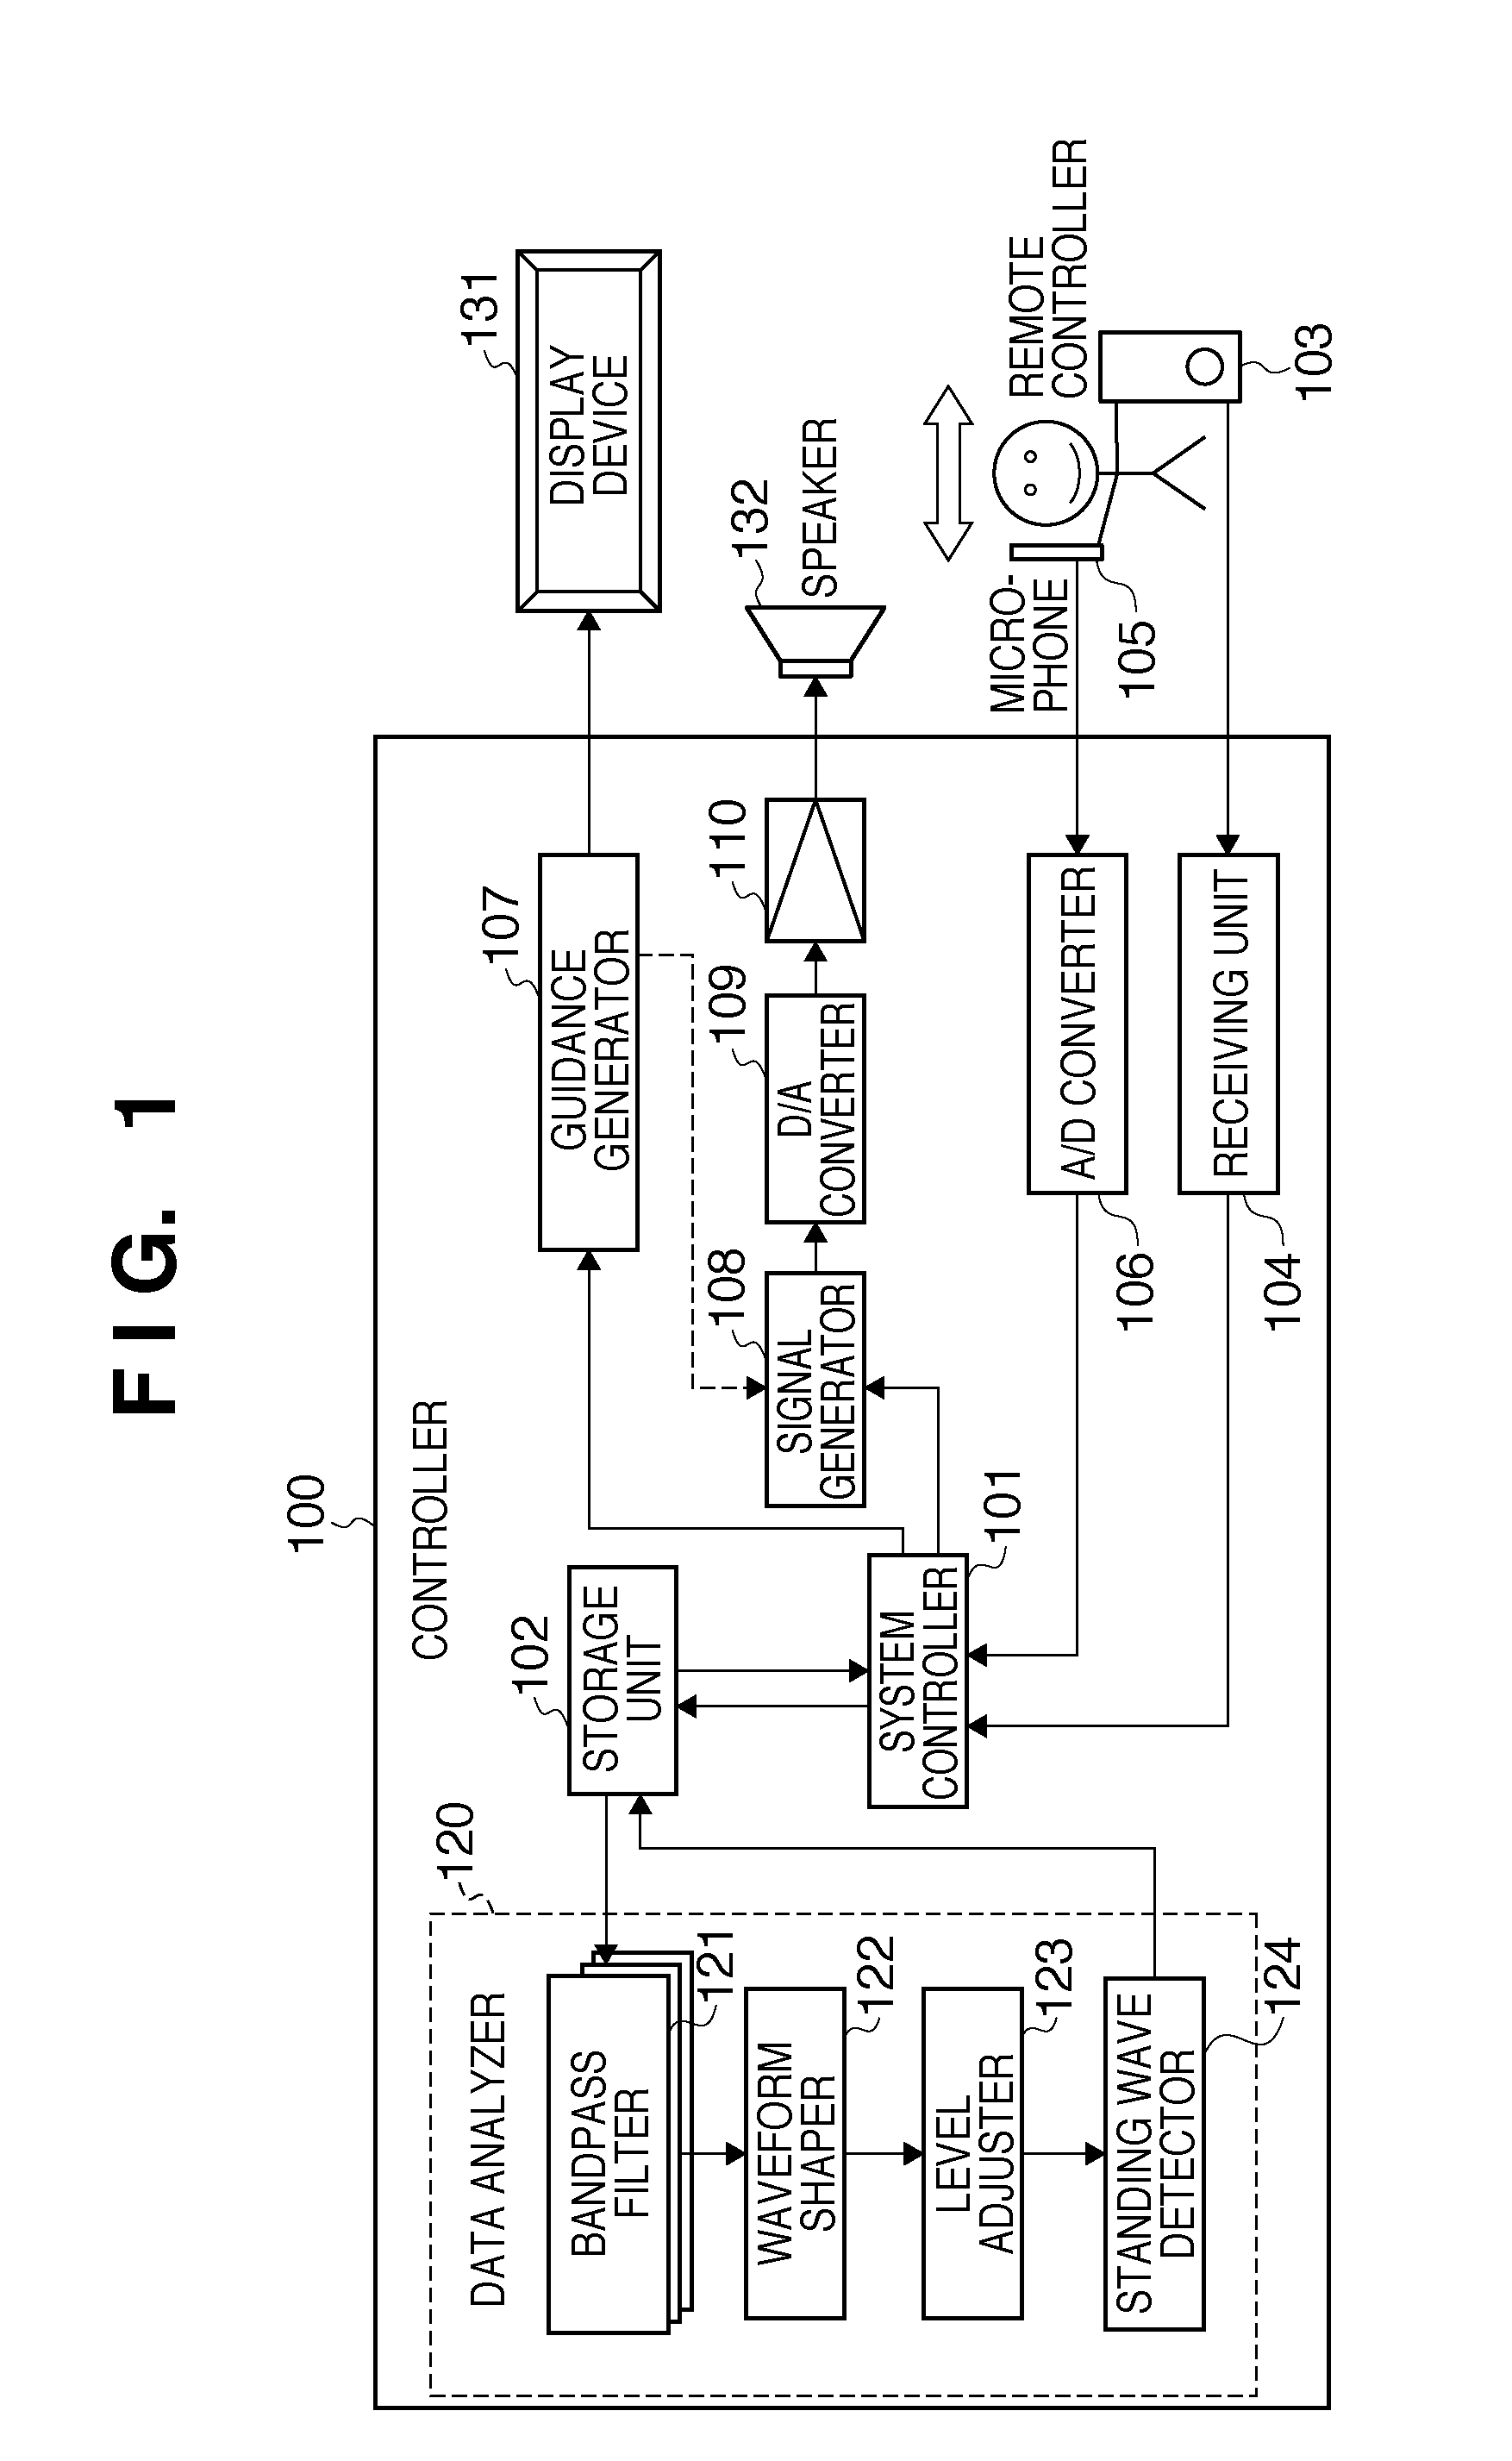 Standing wave detection apparatus and method of controlling the same